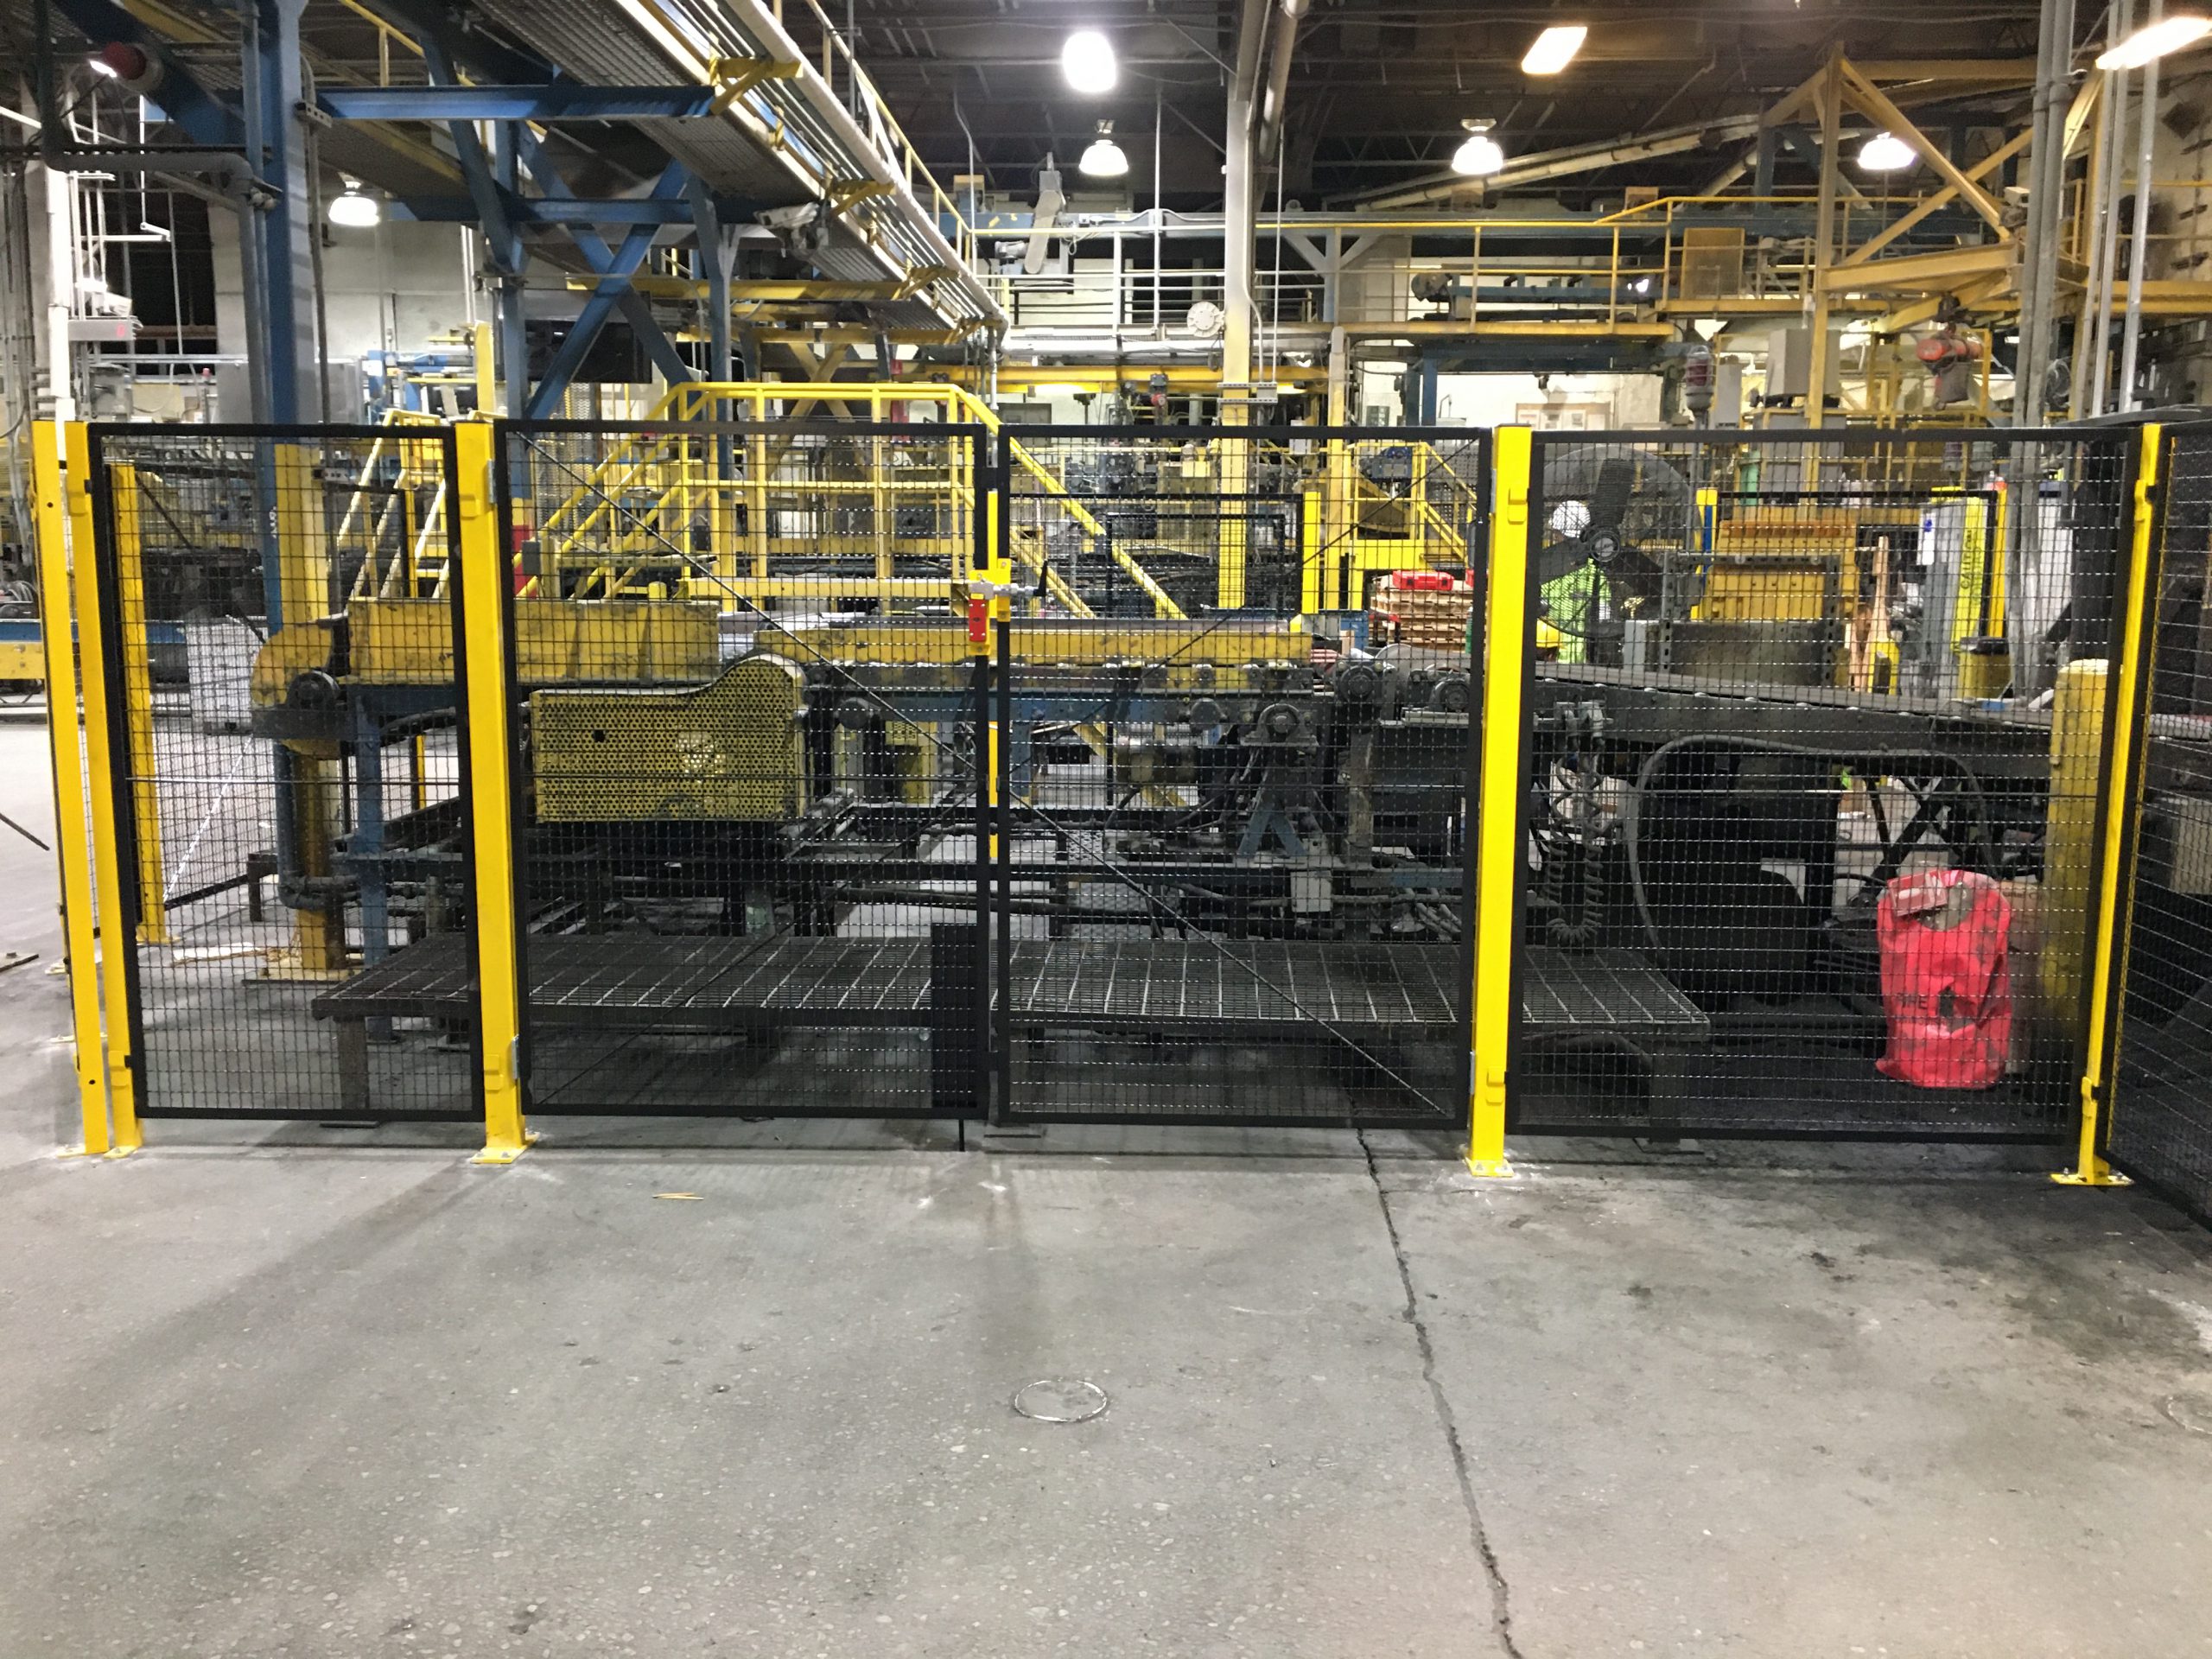 wirecrafters machine guarding production line safety